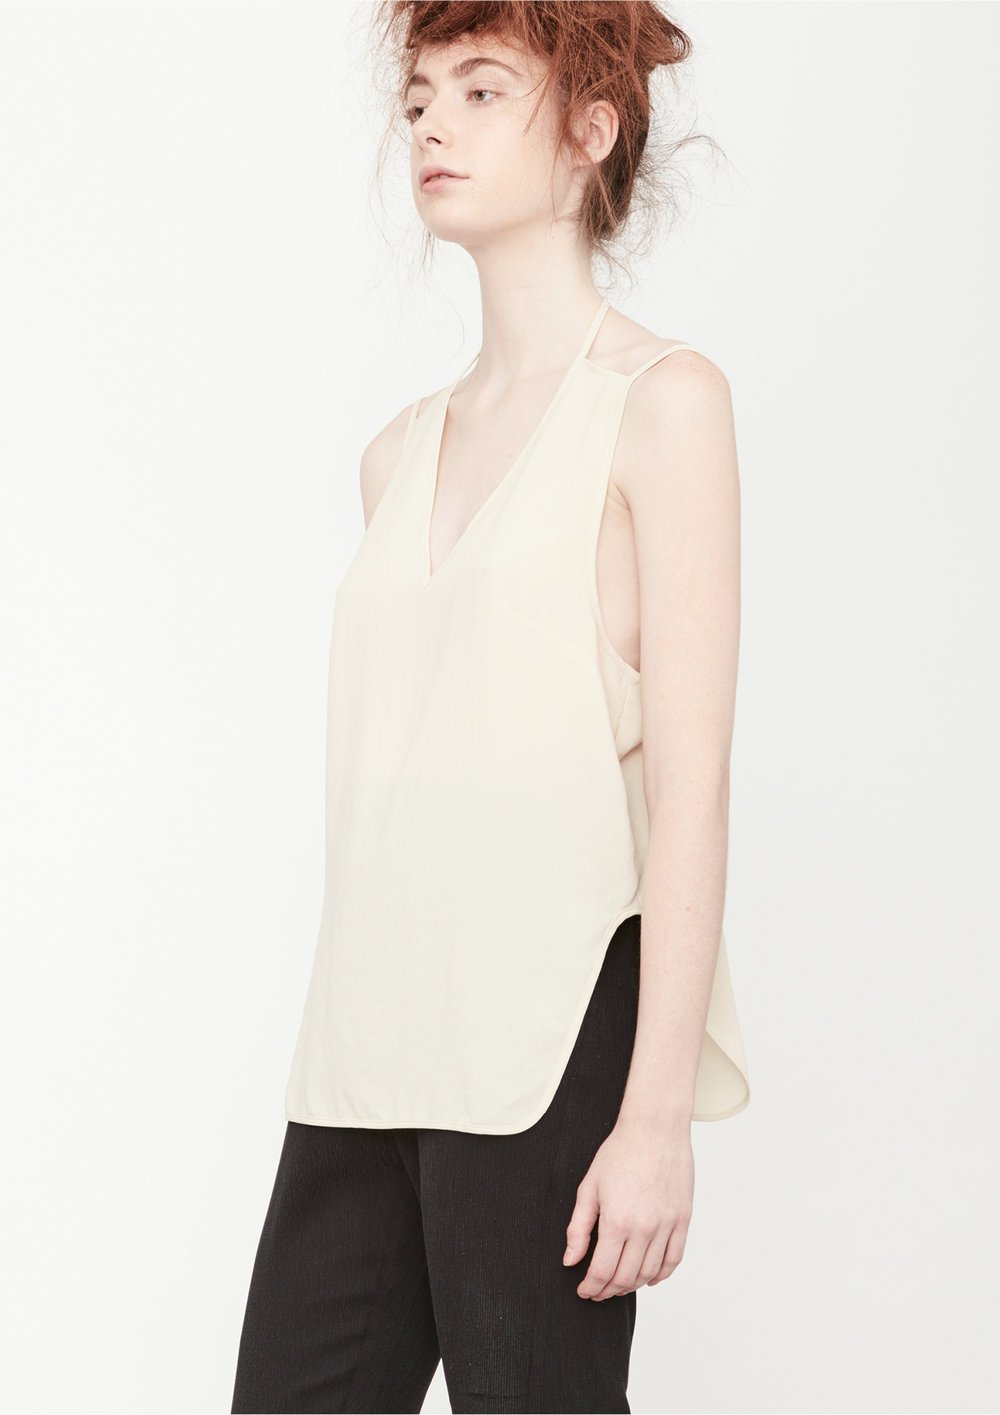 TOP - SPAGHETTI STRAPS CREME by BERENIK - East Hills Casuals